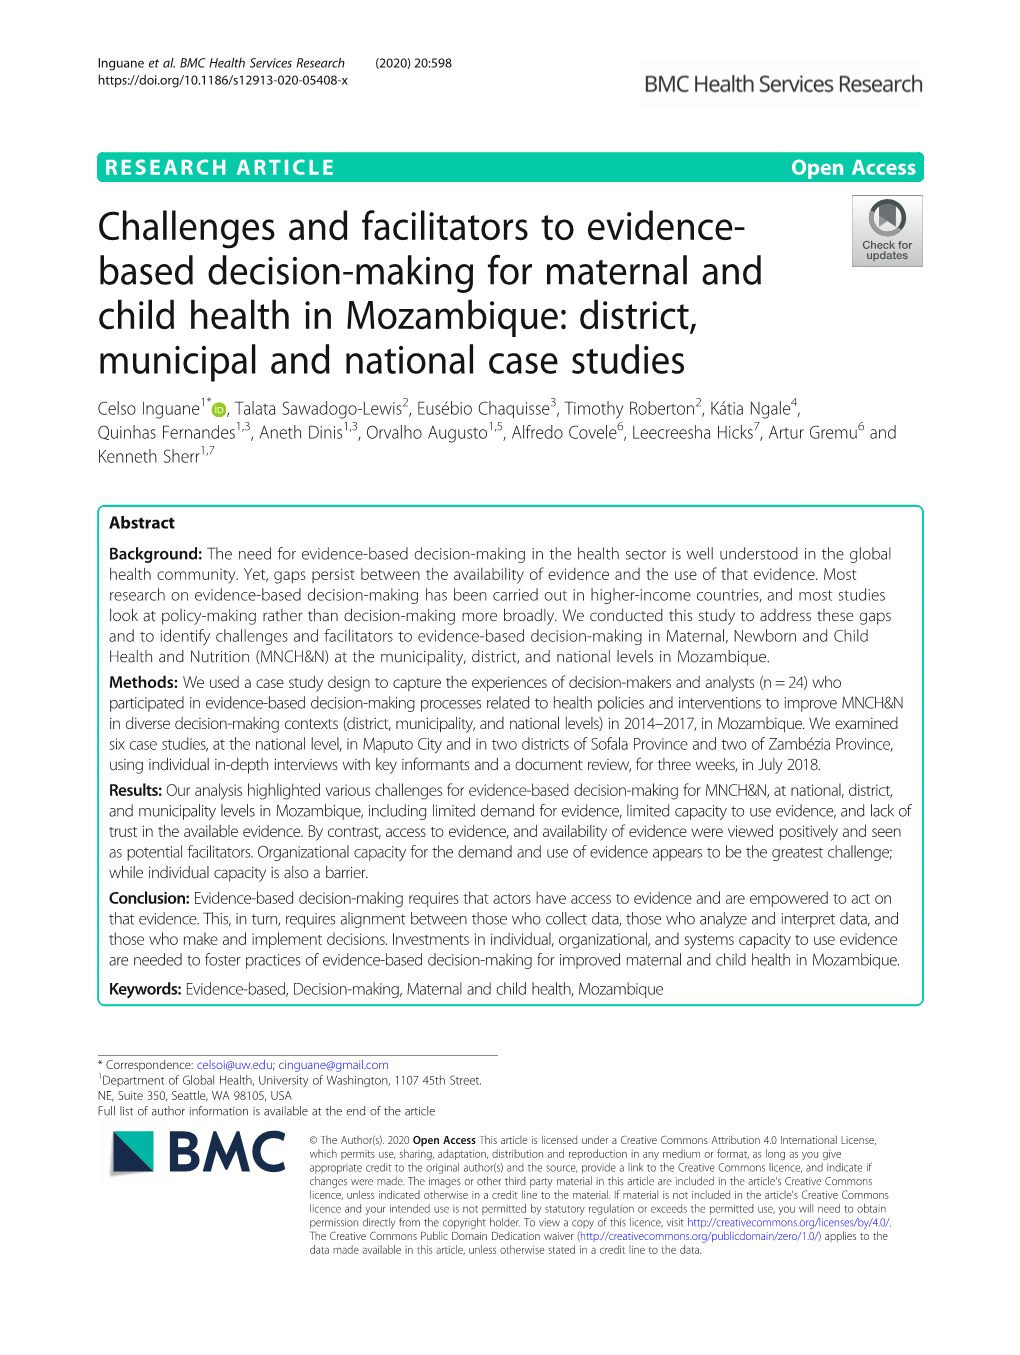 Based Decision-Making for Maternal and Child Health in Mozambique